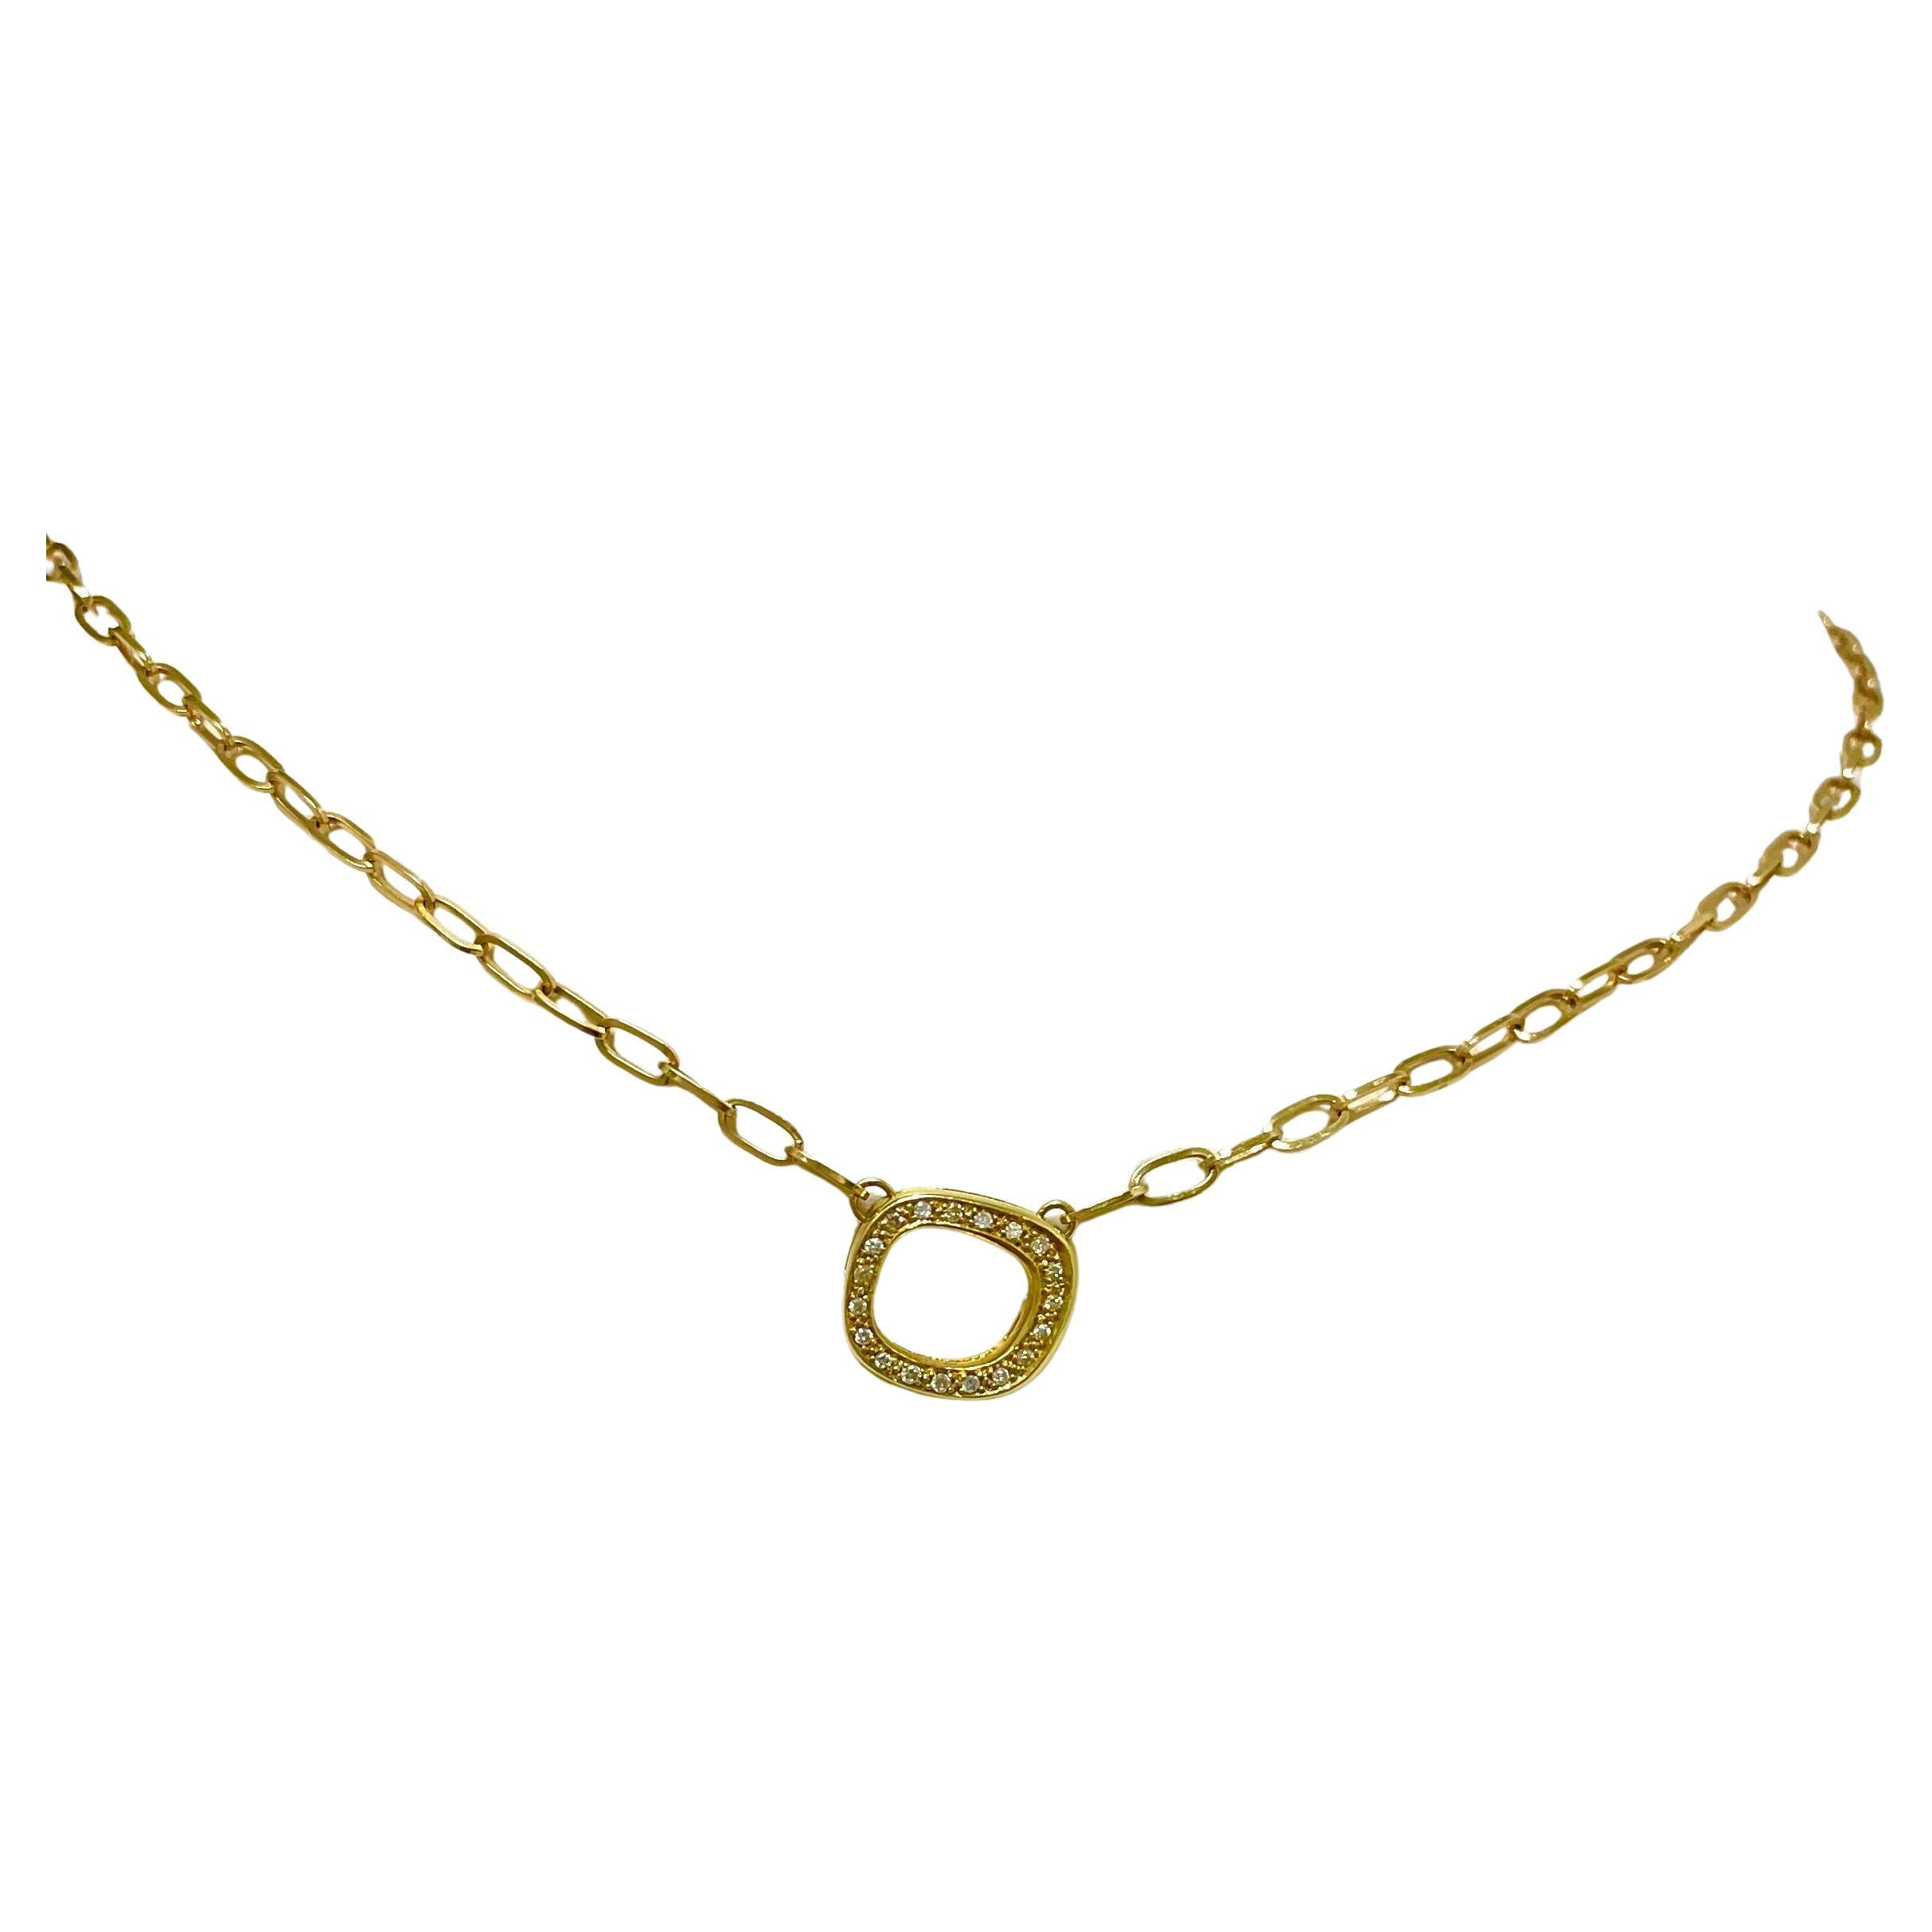 Pave Diamond Pendant with Gold Chain Necklace 3